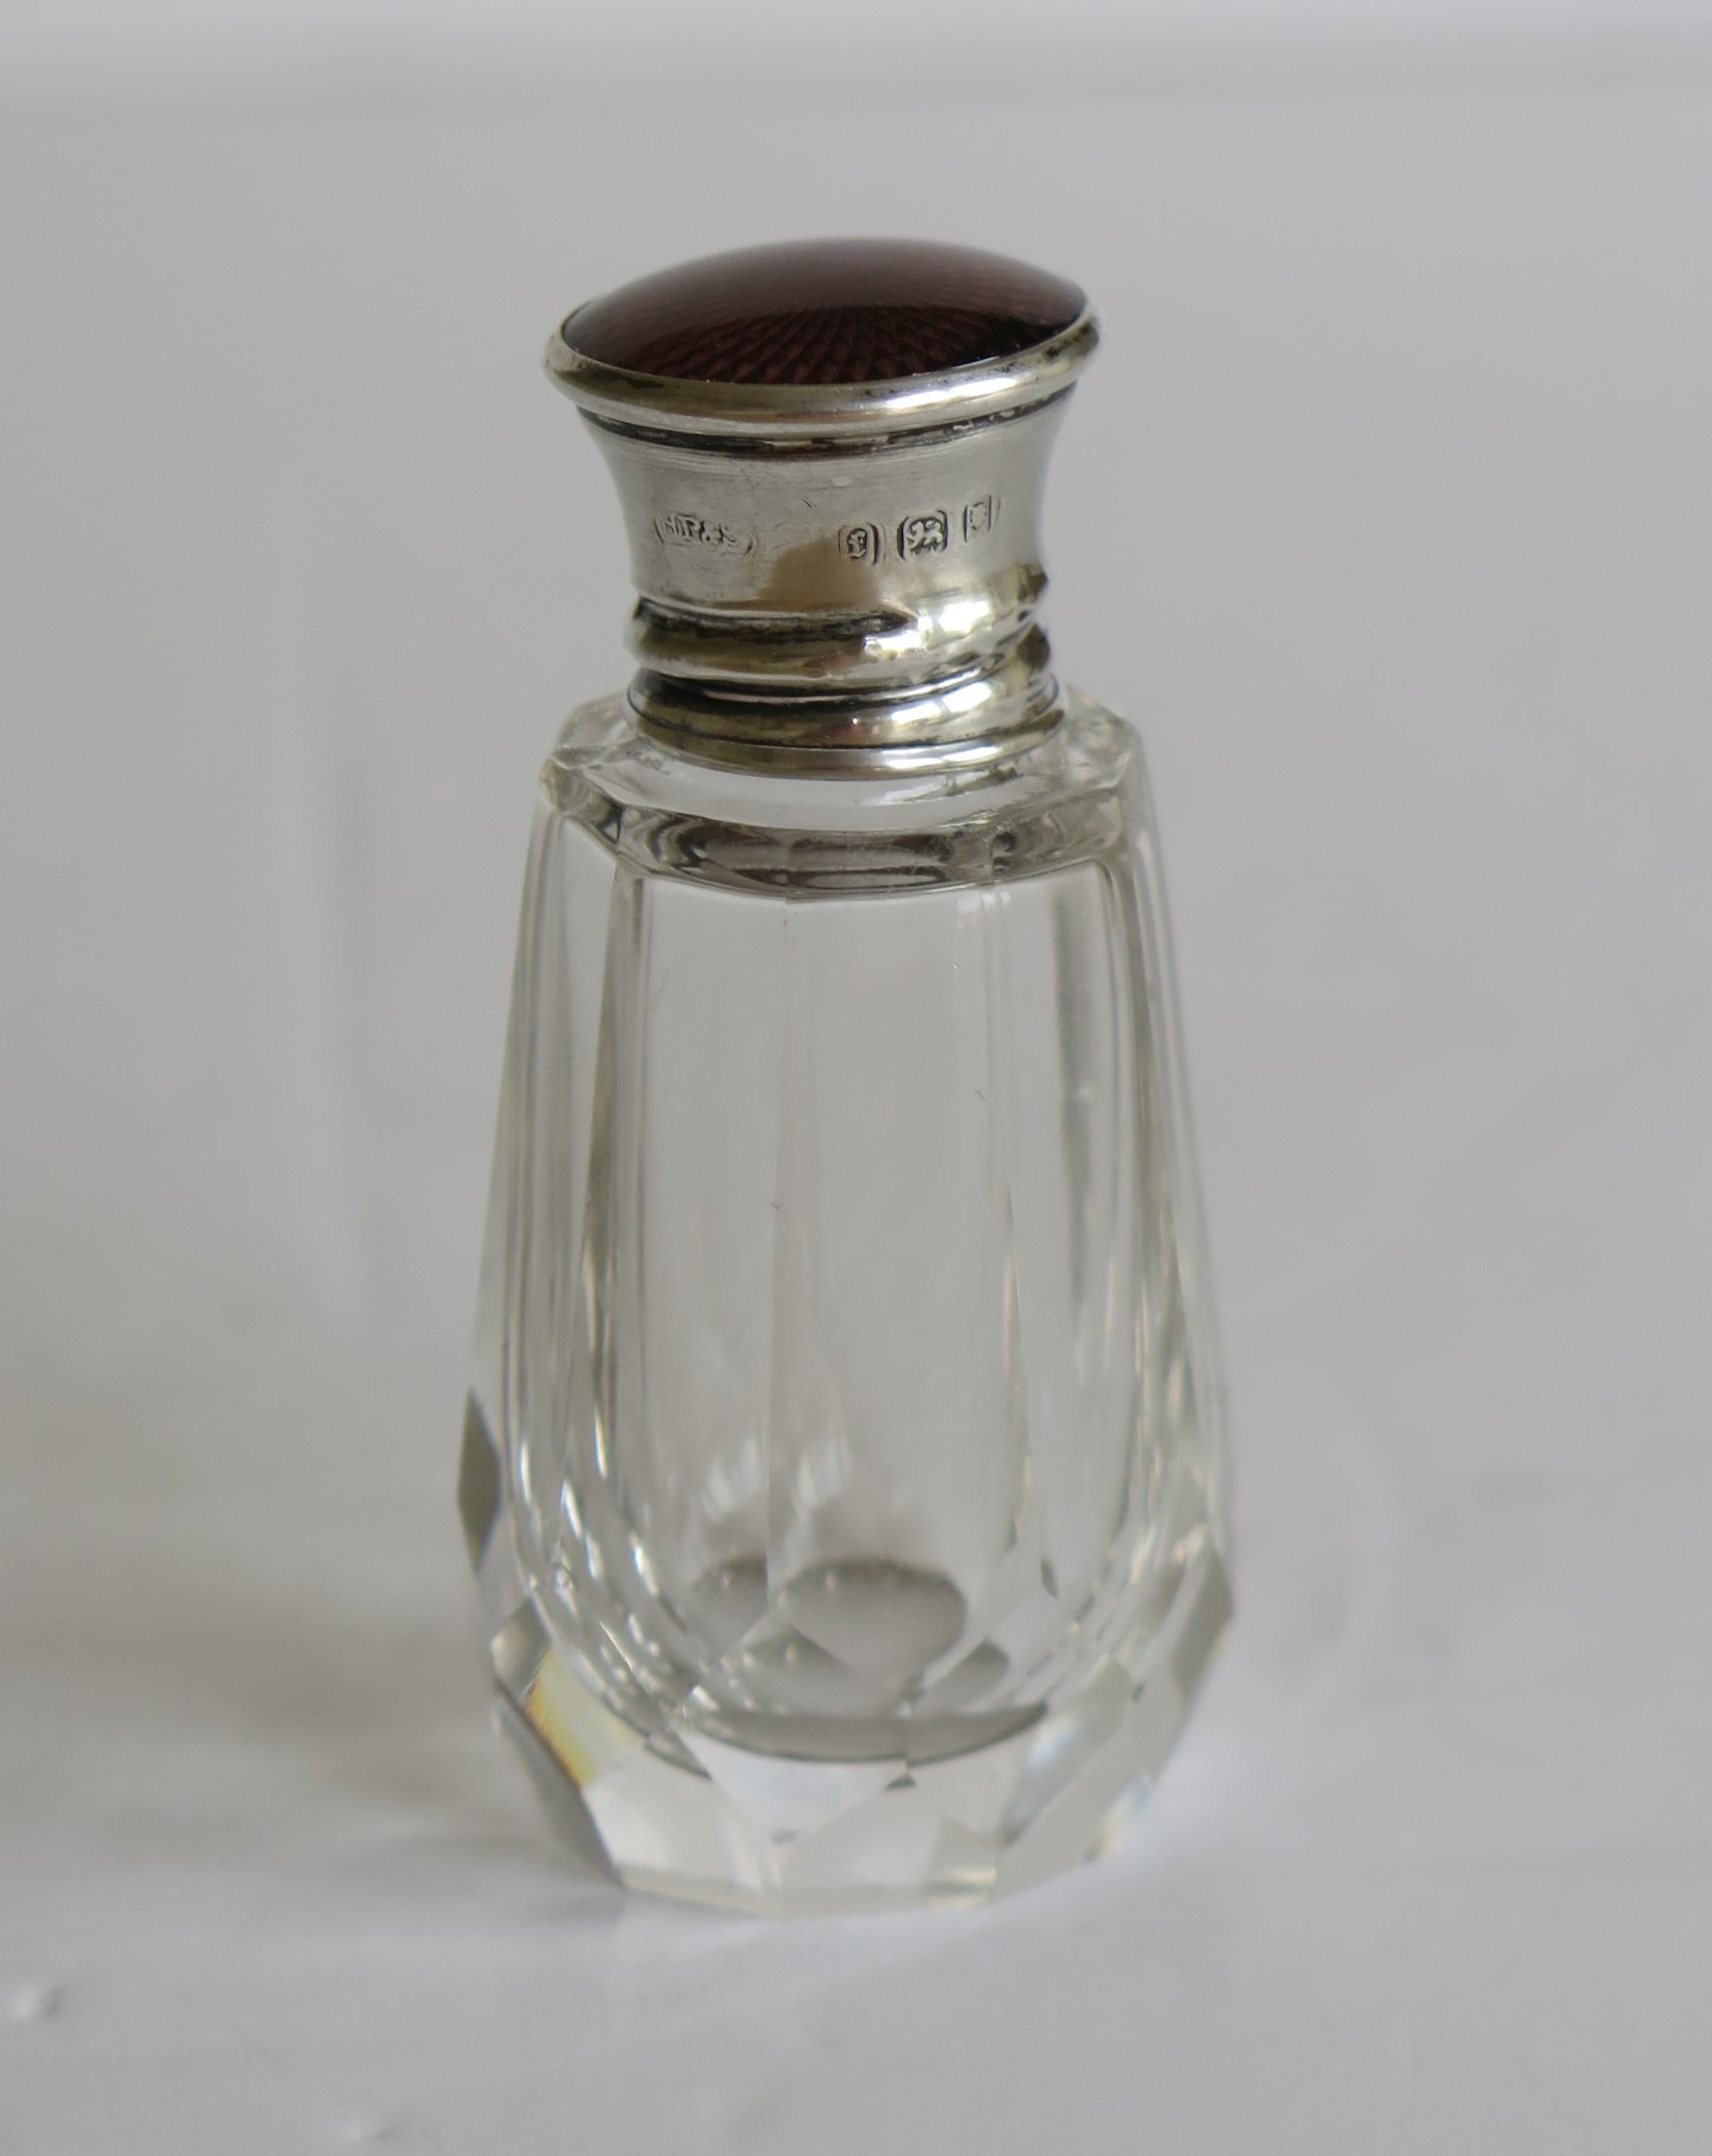 Burgundy Guilloche & Silver Topped Cut Glass Scent or Perfume Bottle London 1921 For Sale 1